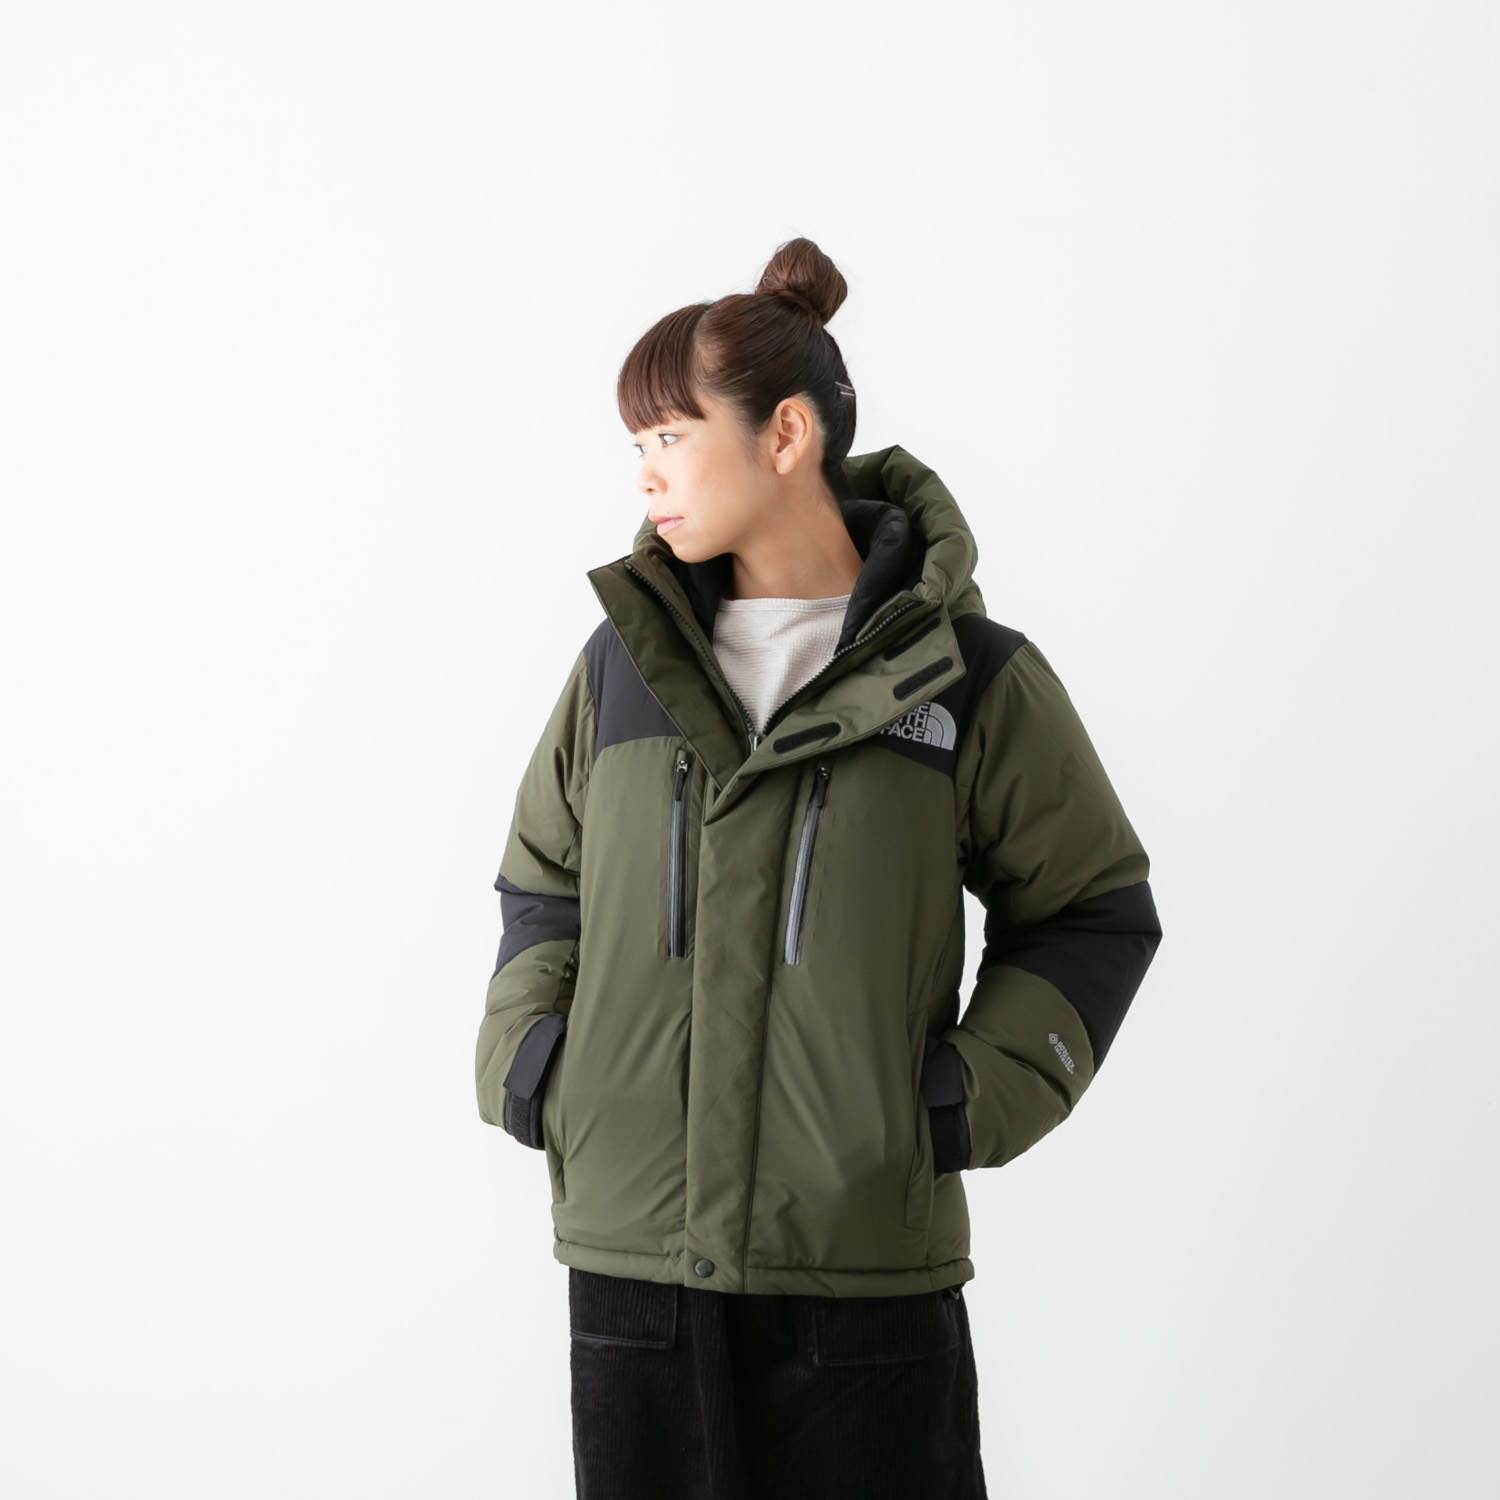 THE NORTH FACE バルトロライトジャケット ND91950 カーキバルトロ